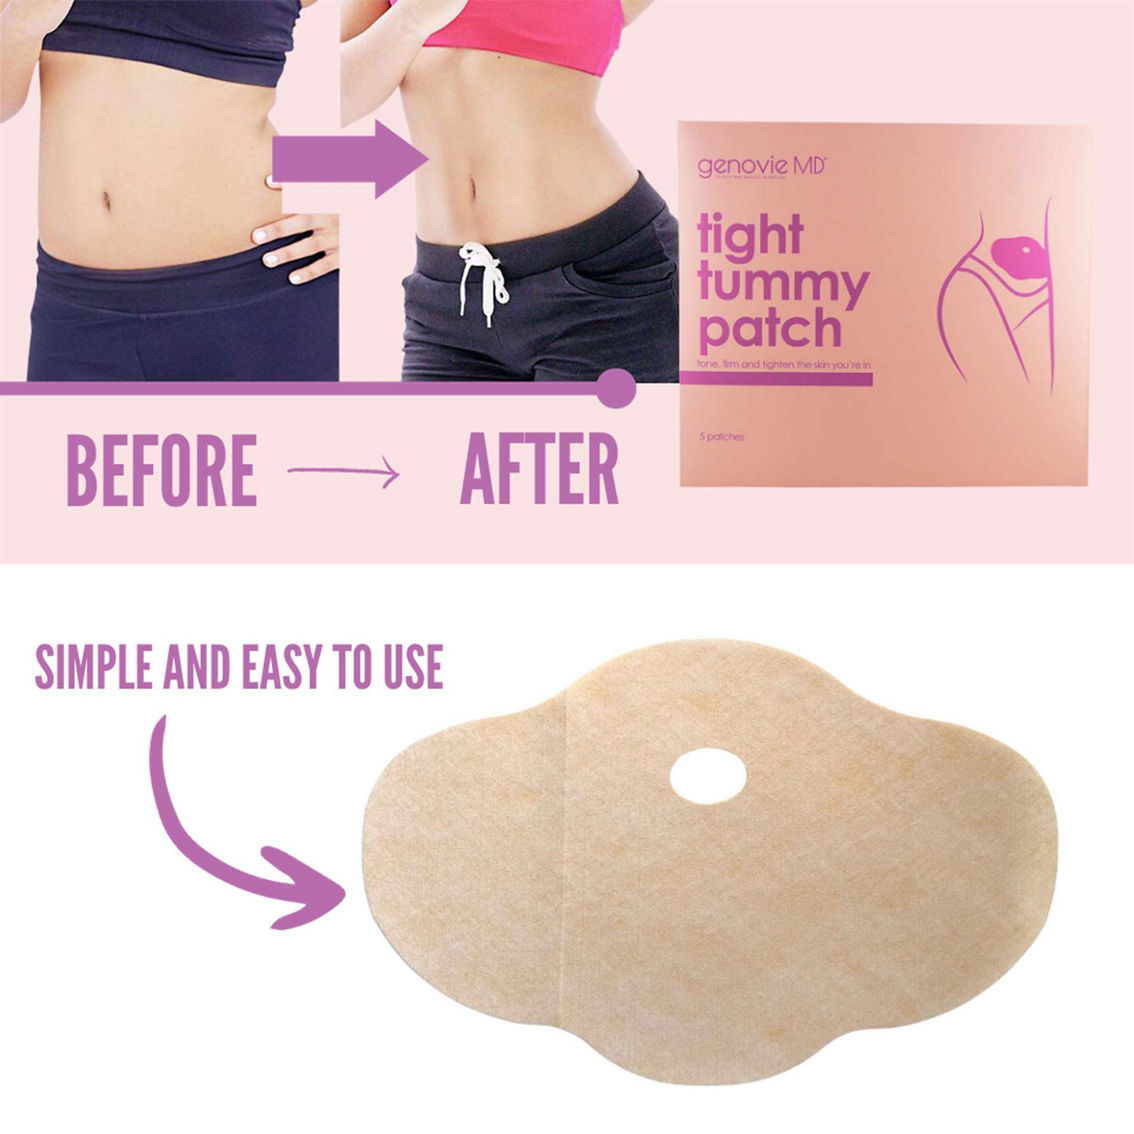 Genovie MD All Natural Tight Tummy Patch Applicator - Image 4 of 5